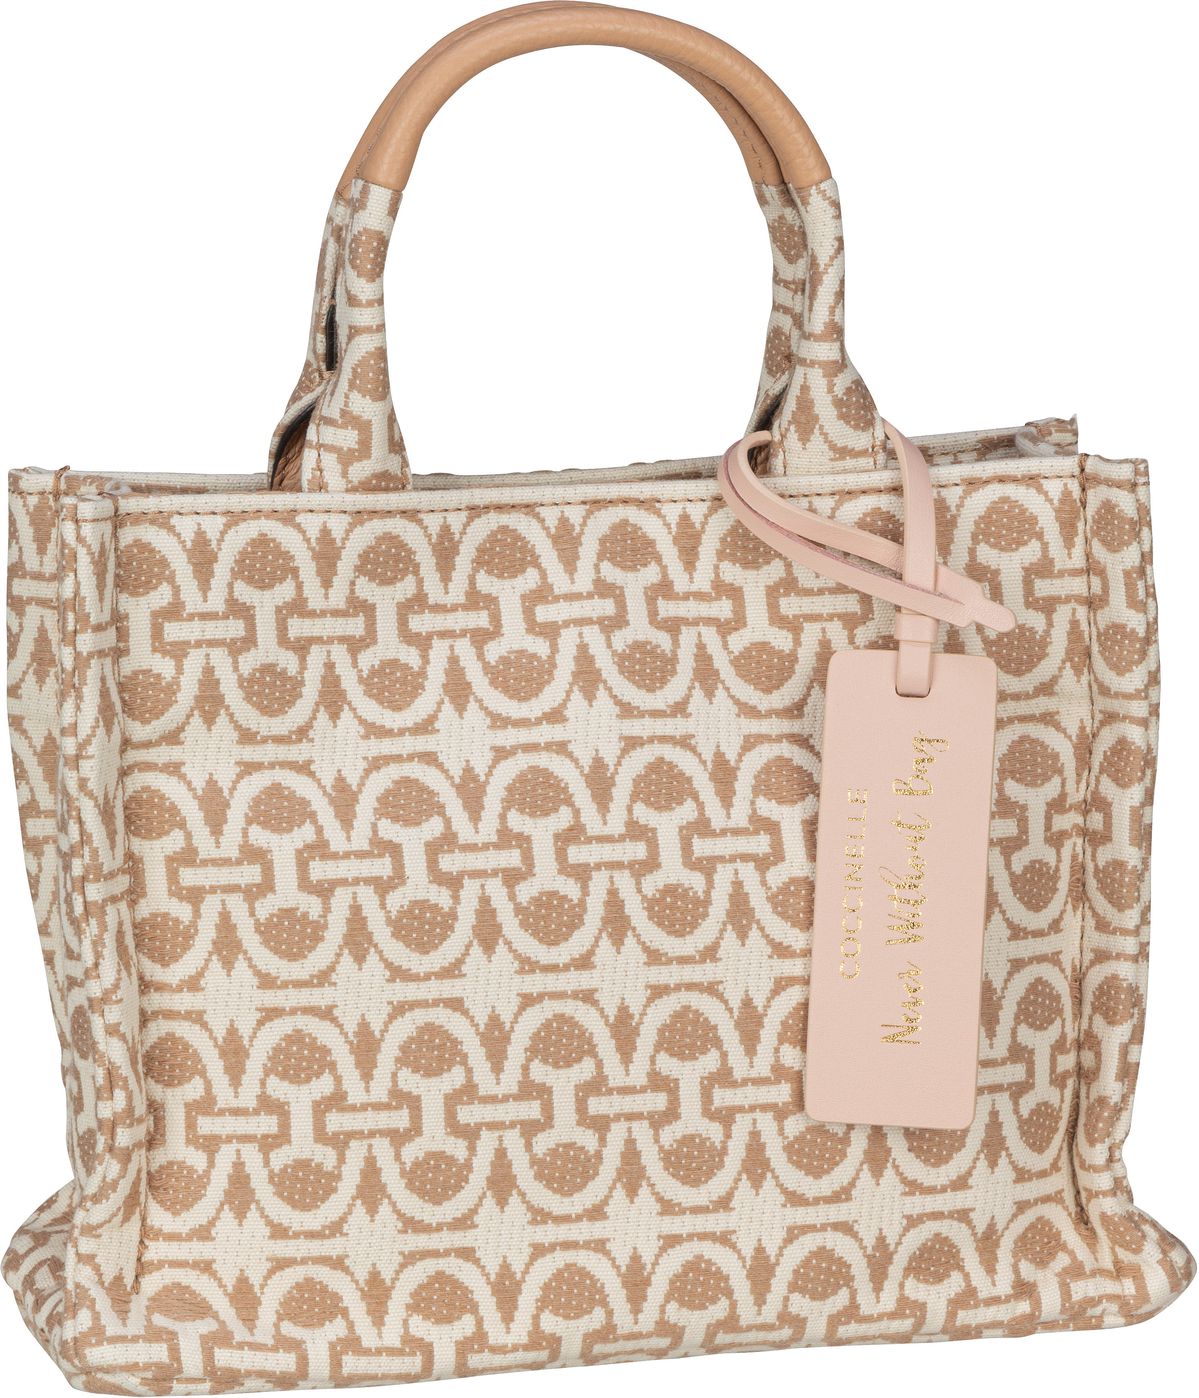 Coccinelle Never Without Bag 1803  in Multi Natural/Toasted (4.6 Liter), Handtasche